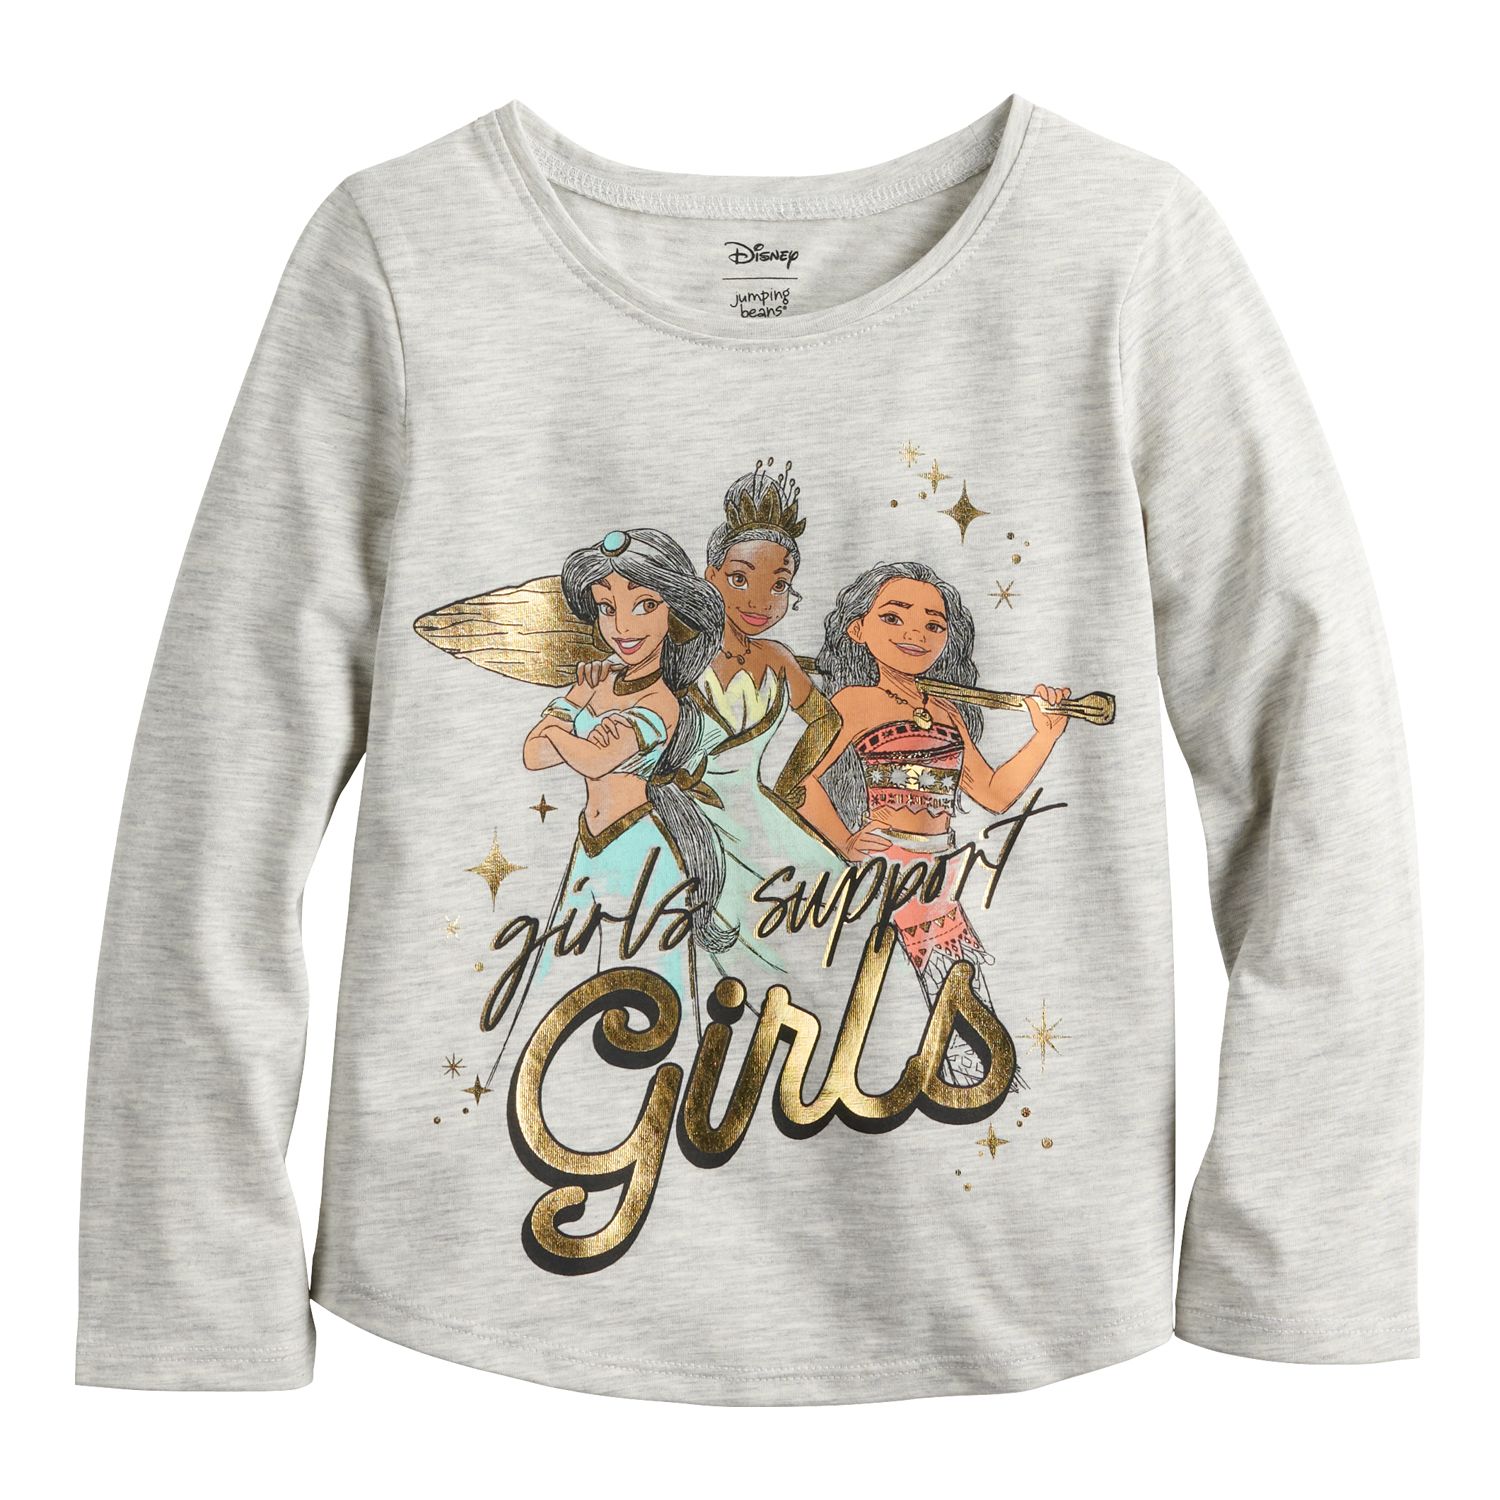 Image for Disney/Jumping Beans Disney's Princess Toddler Girl Graphic Tee by Jumping Beans® at Kohl's.